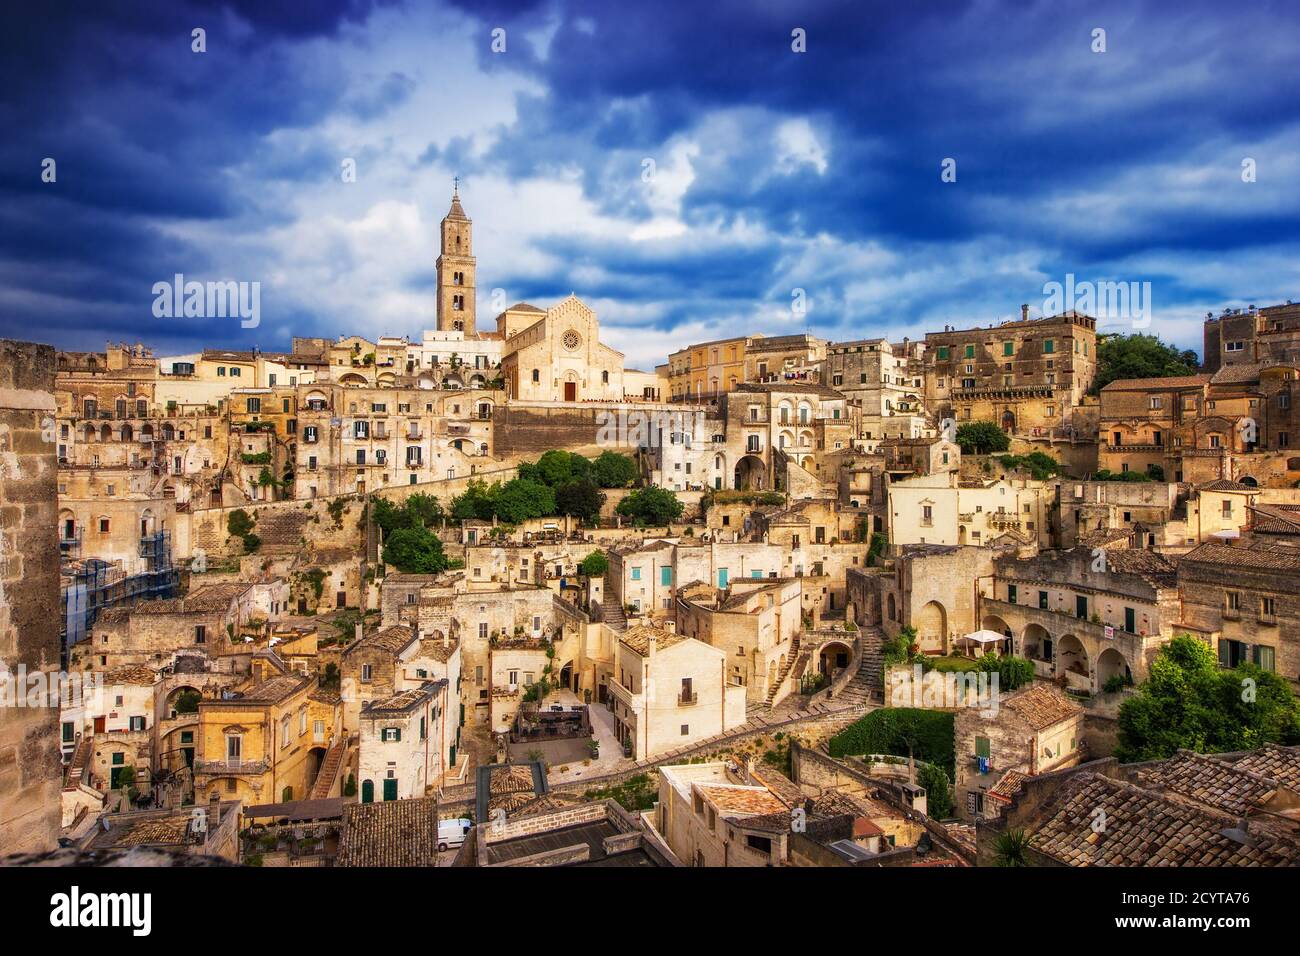 The old town of Matera, Unesco World Heritage site in Basilicata, Italy  Stock Photo - Alamy